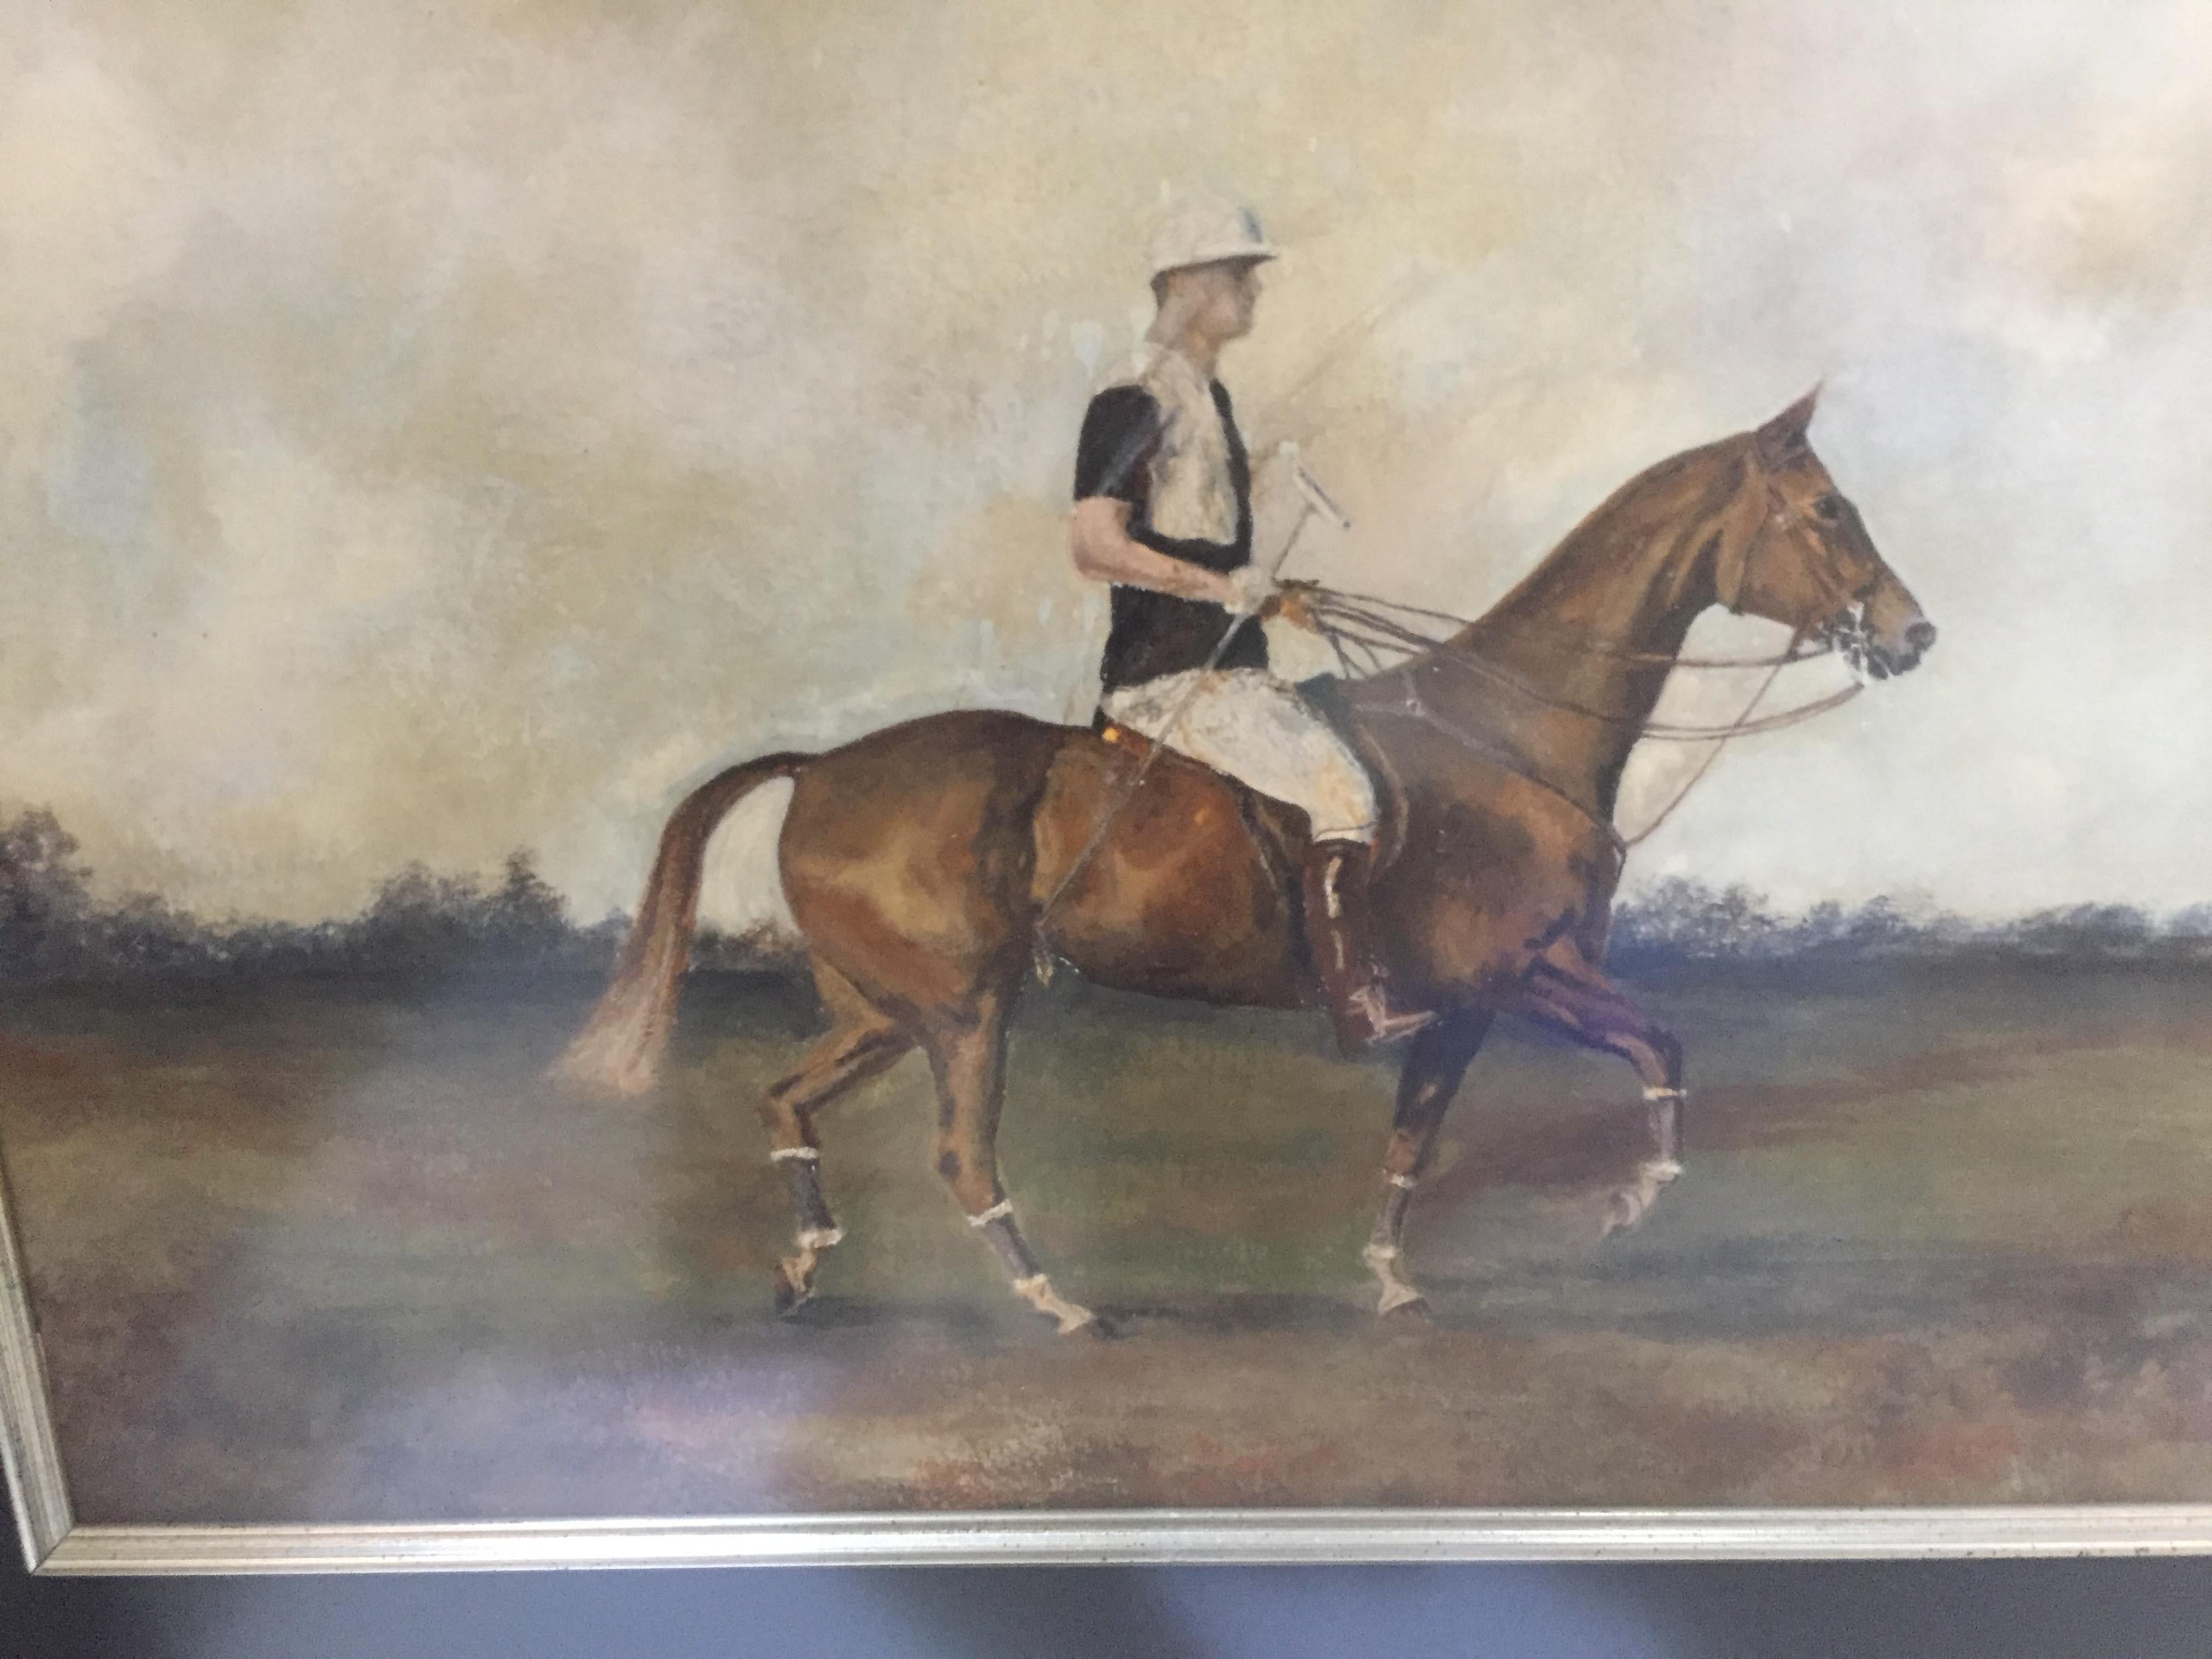 Attributed to George Denholm Armour 

image 11 x 14 watercolor & gouache

Text on back of painting says:
Meadowbrook Polo Club
US Open Championship
1929 Champions The Hurricanes
Stephen Sanford
Goadby Loew

The Meadowbrook Polo Club